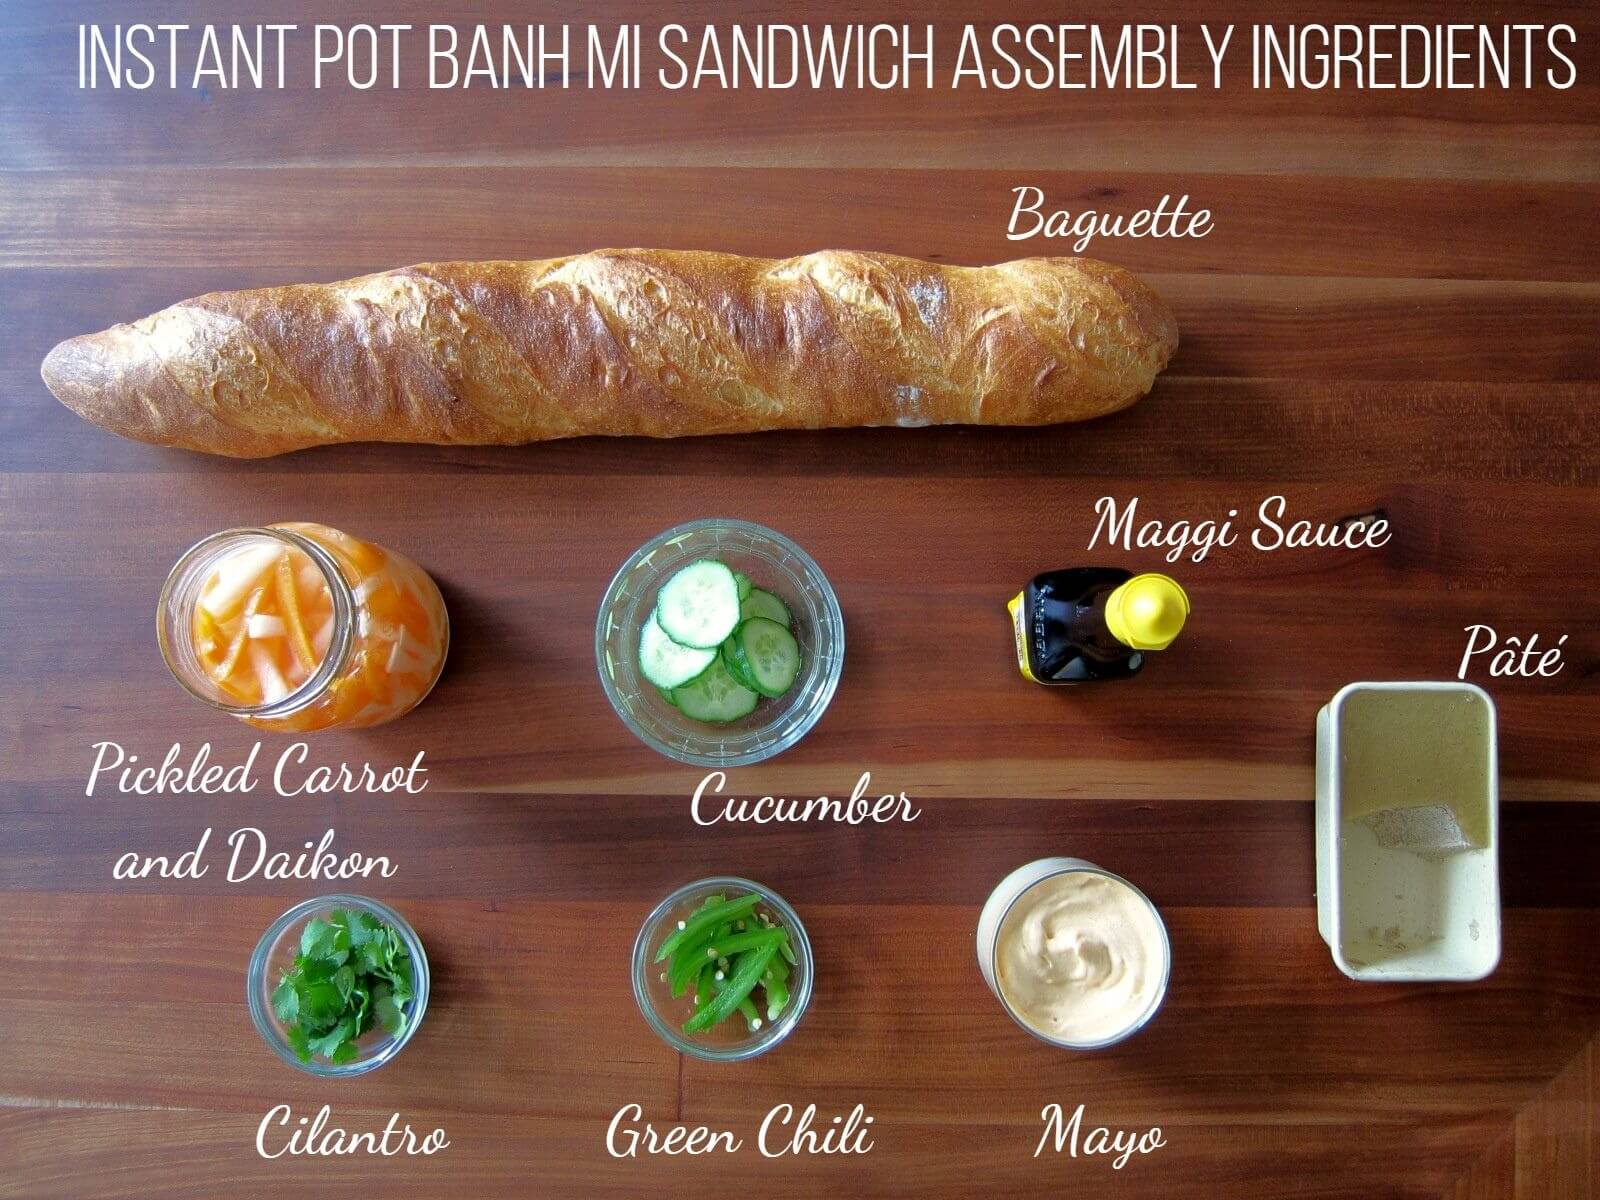 Instant Pot Banh Mi Assembly Ingredients collage - baguette, pickled carrot and daikon, cucumber, maggi sauce, cilantro, green chili, mayo, pate - Paint the Kitchen Red